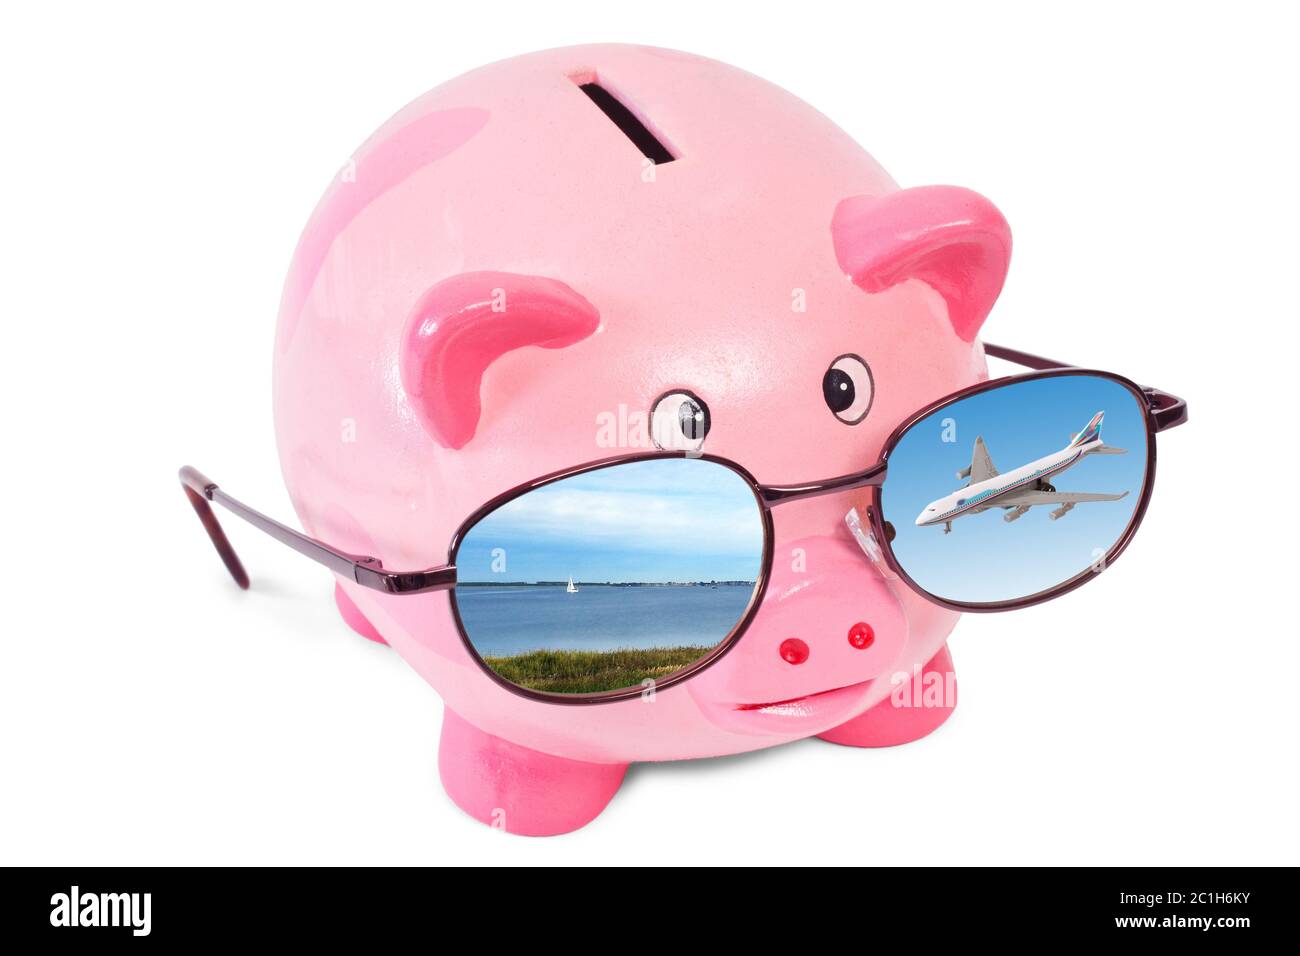 pink piggy bank with sunglasses Stock Photo